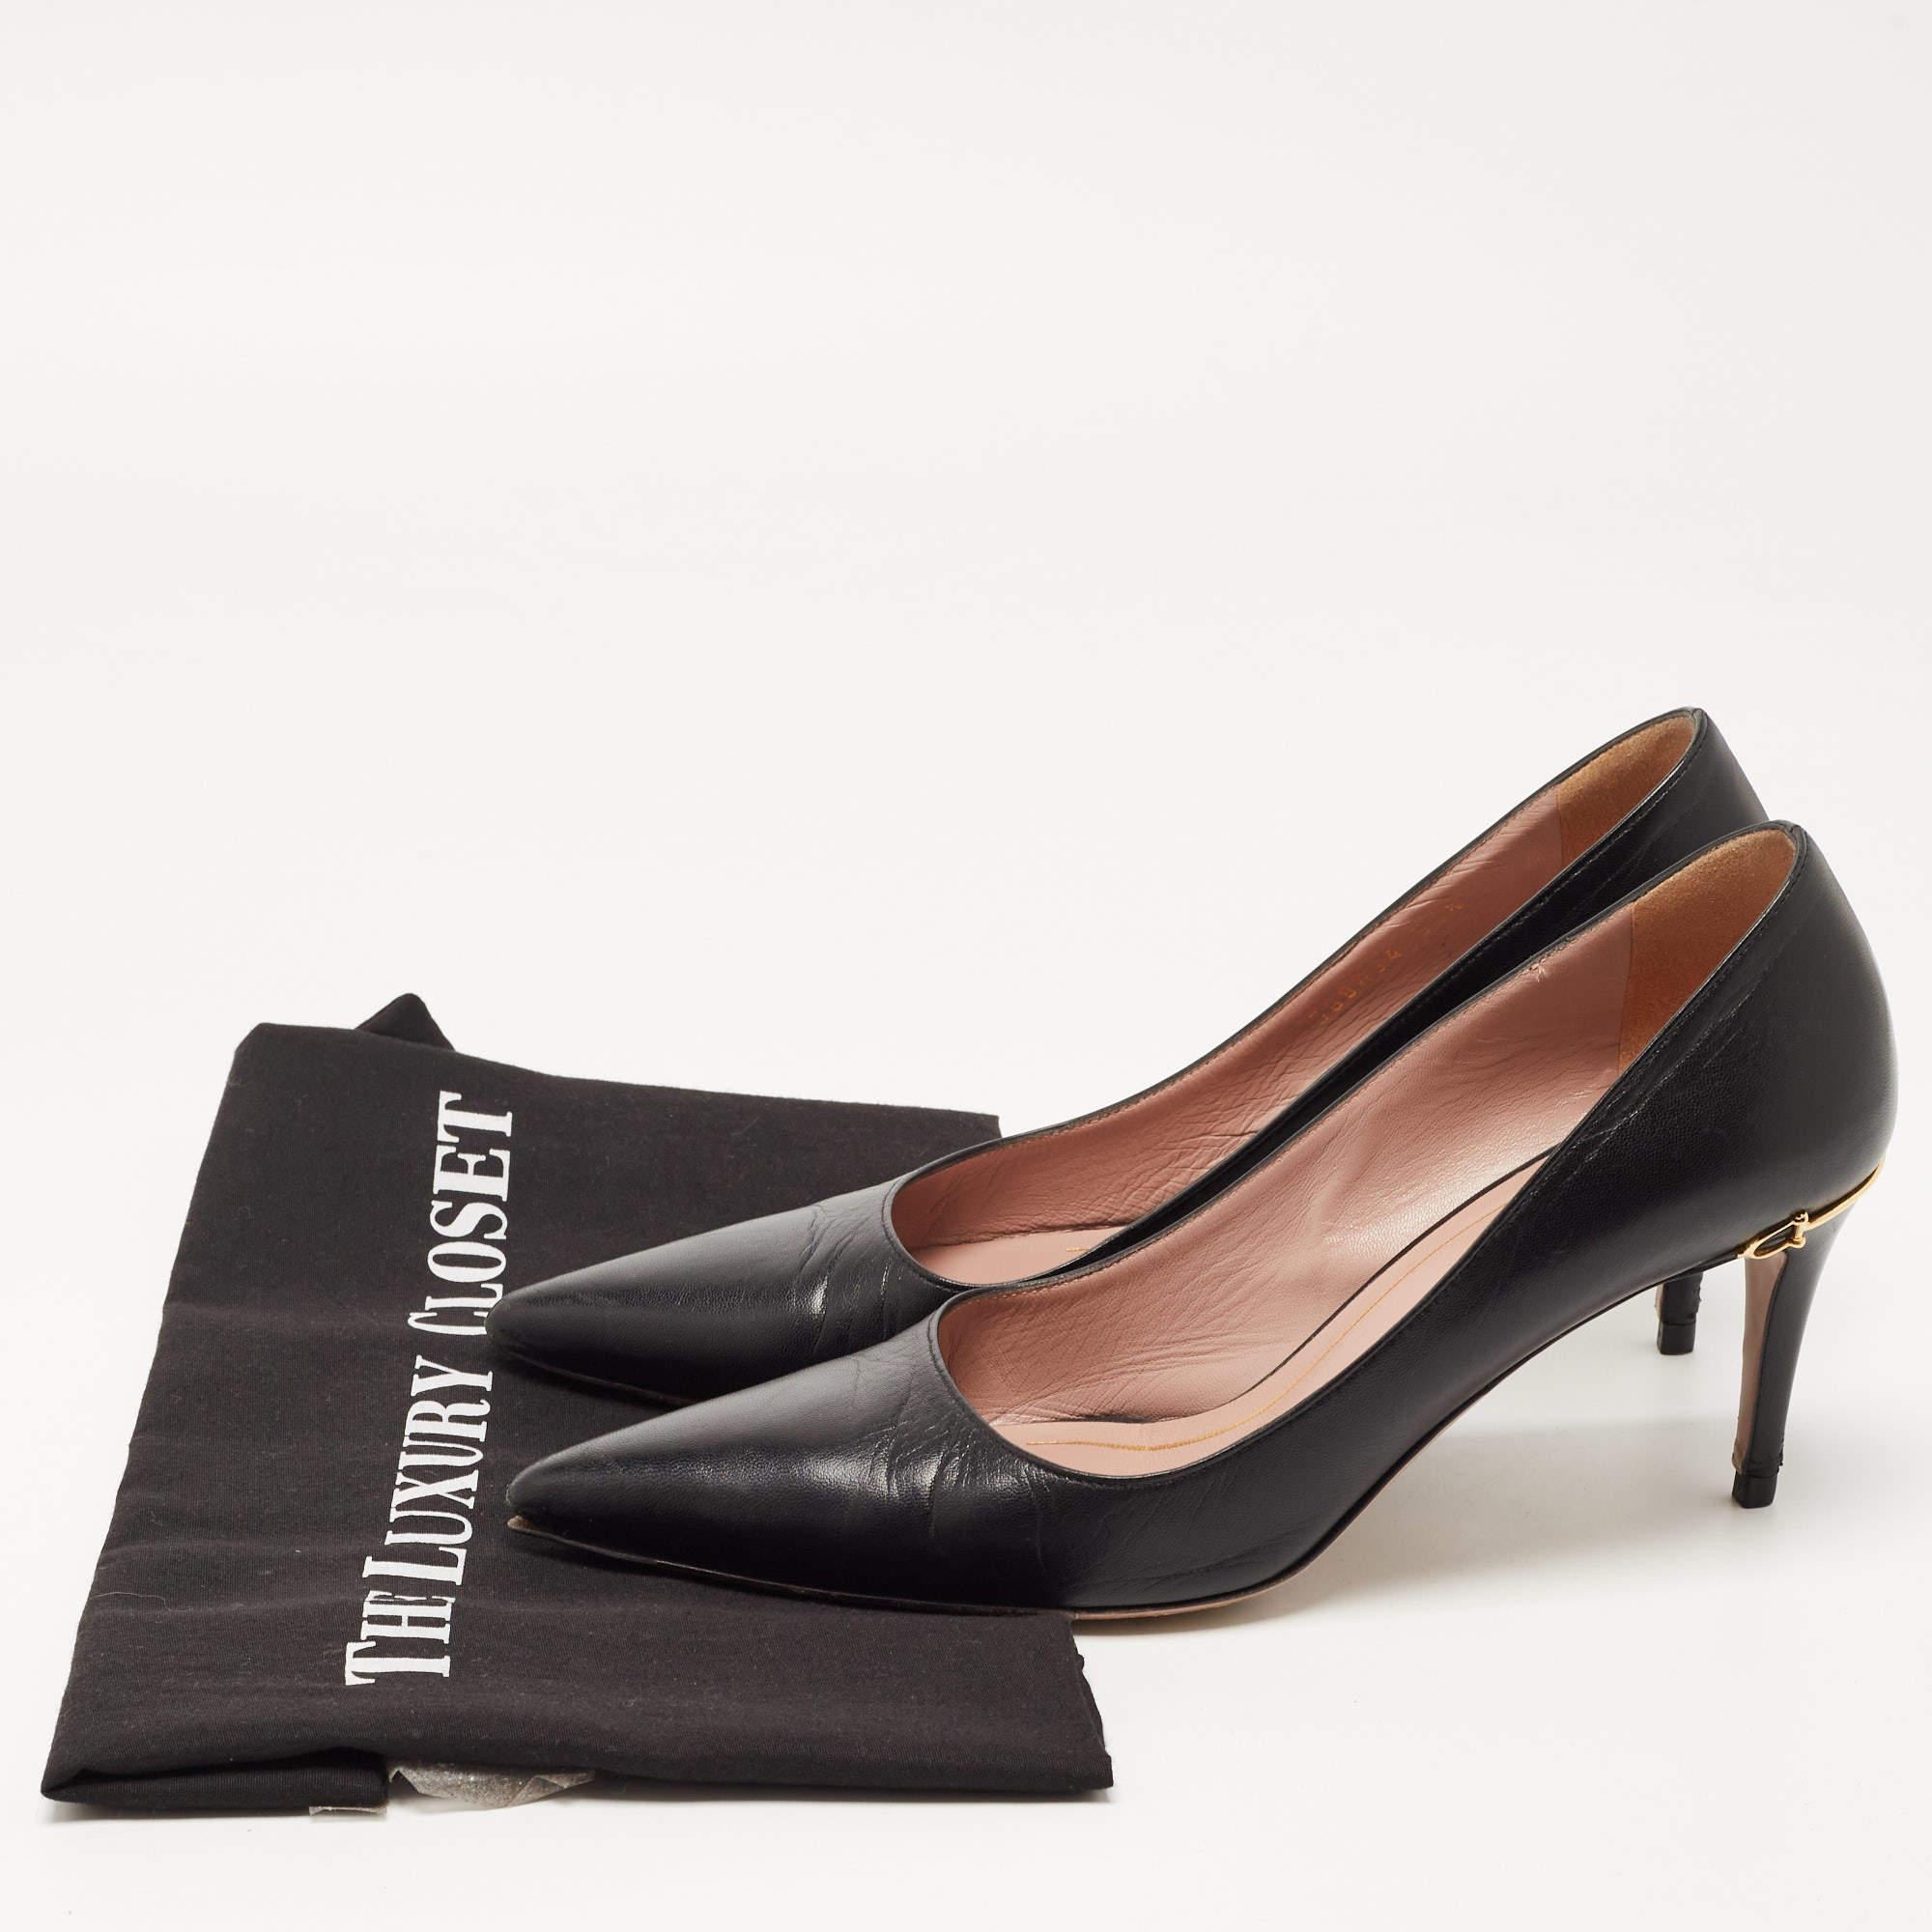 Gucci Black Leather Pointed Toe Pumps Size 36.5 For Sale 5